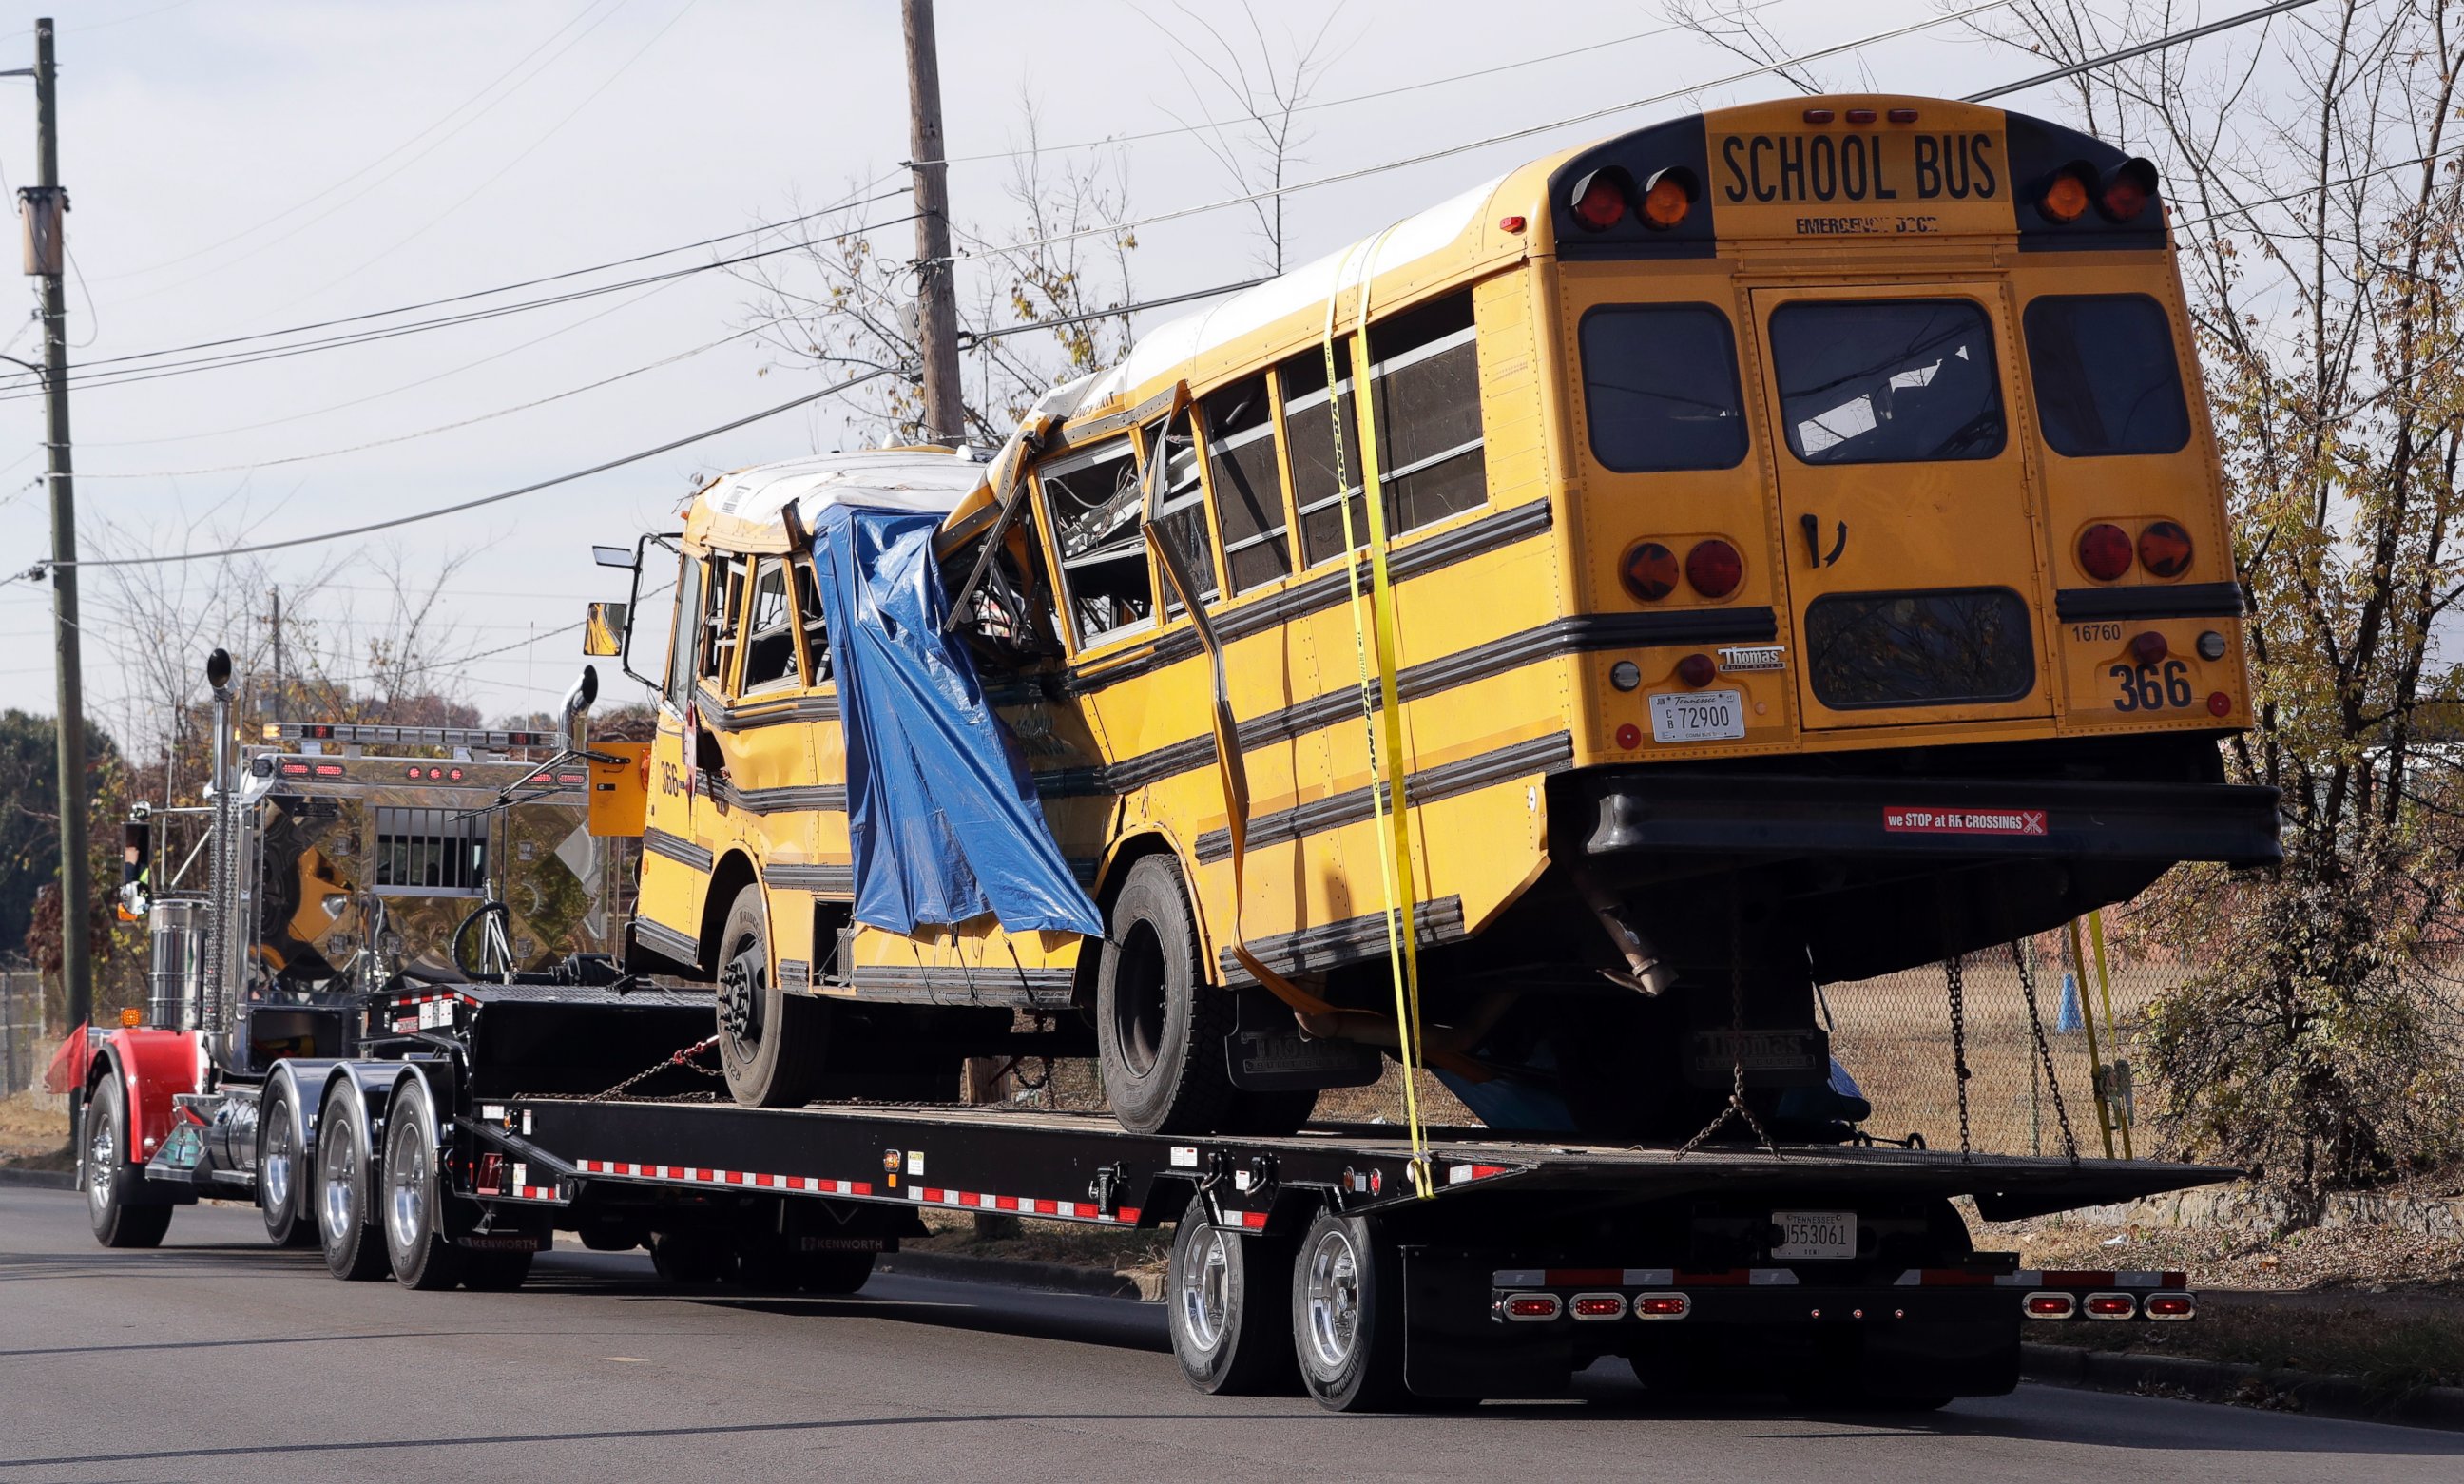 PHOTO: A school bus is carried away Tuesday, Nov. 22, 2016, in Chattanooga, Tenn., from the site where it crashed on Monday.